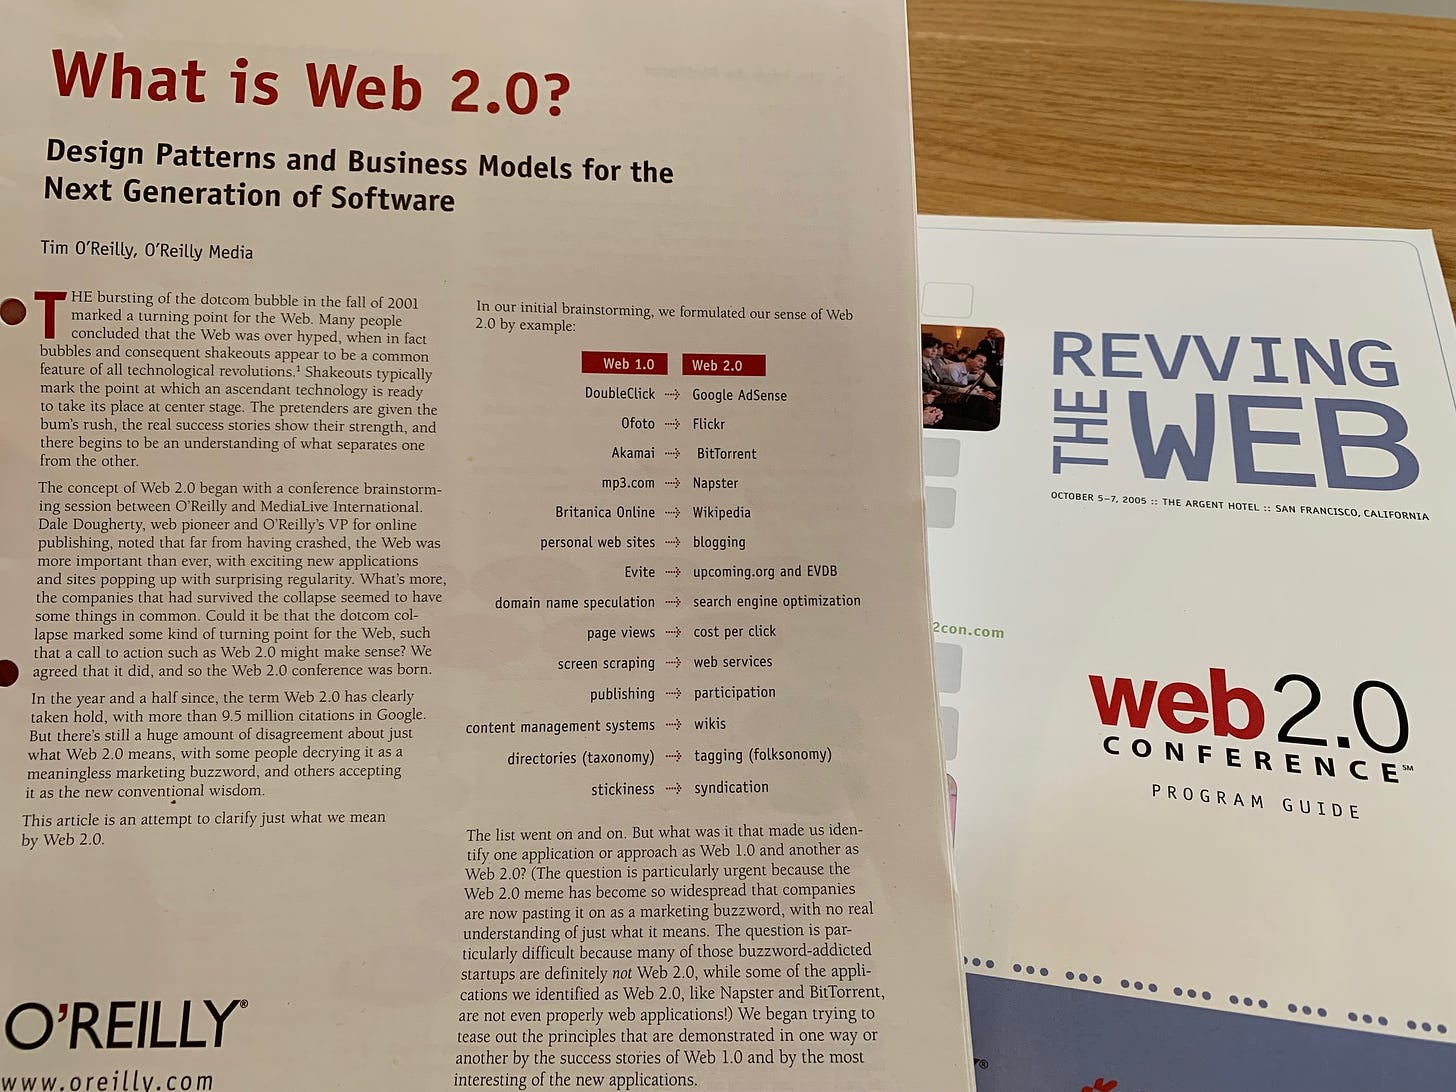 Along with the official program guide, attendees received a copy of Tim O’Reilly’s “What is Web 2.0?” essay